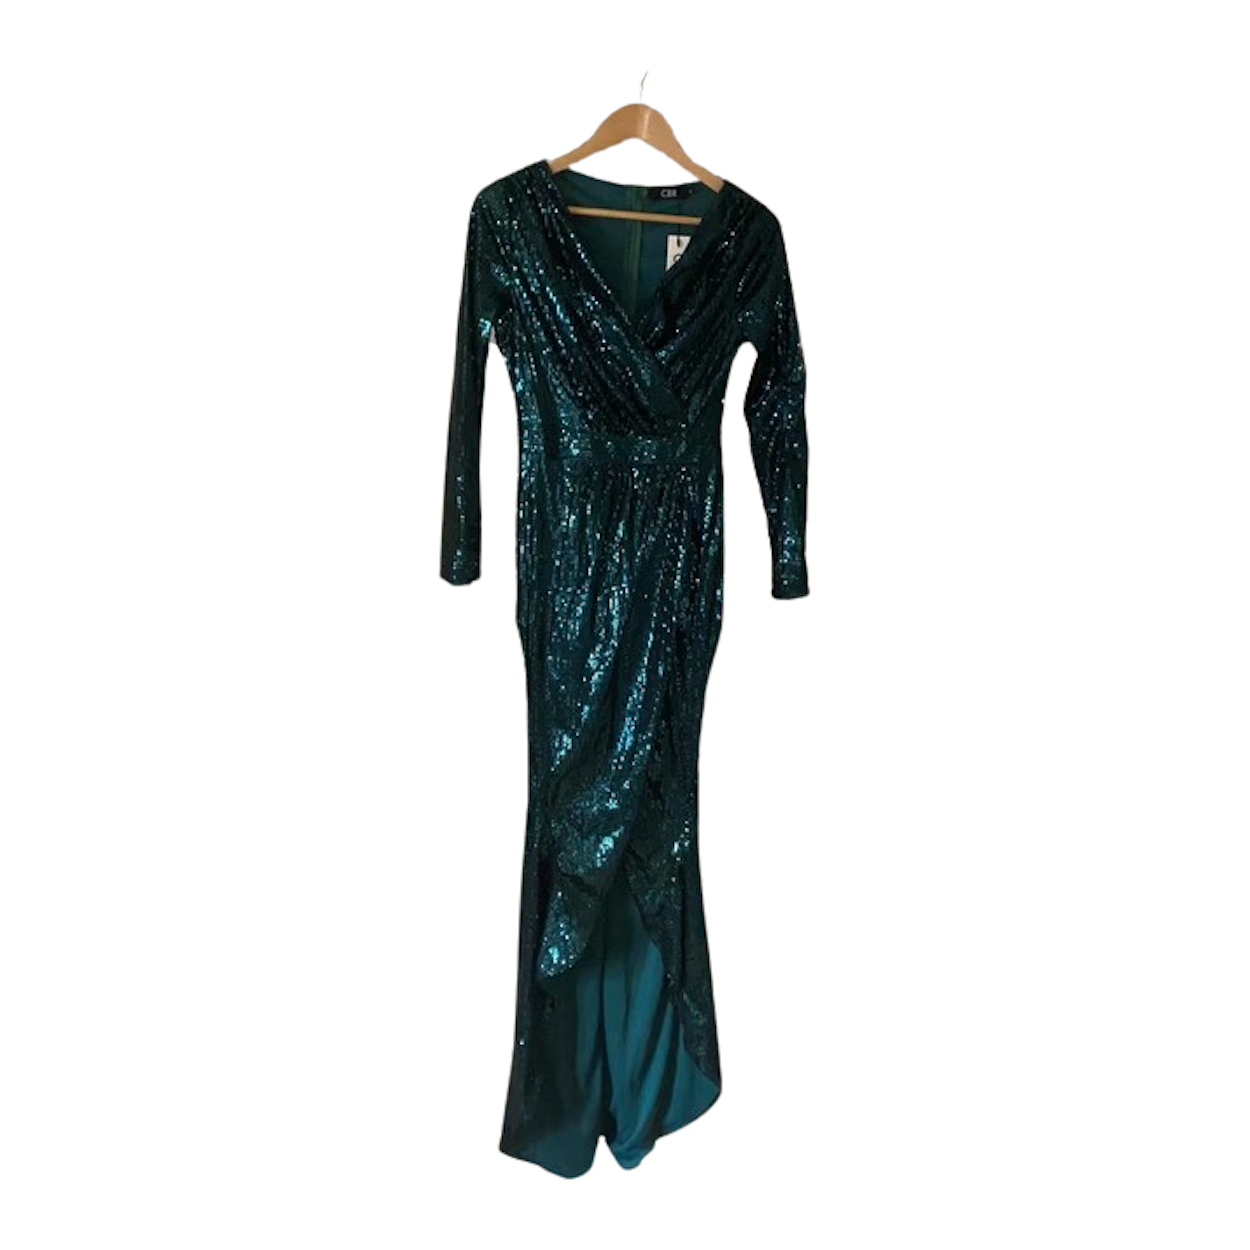 NEW Stunning Green Sequin Mermaid Tail Prom Dress | Evening Gown